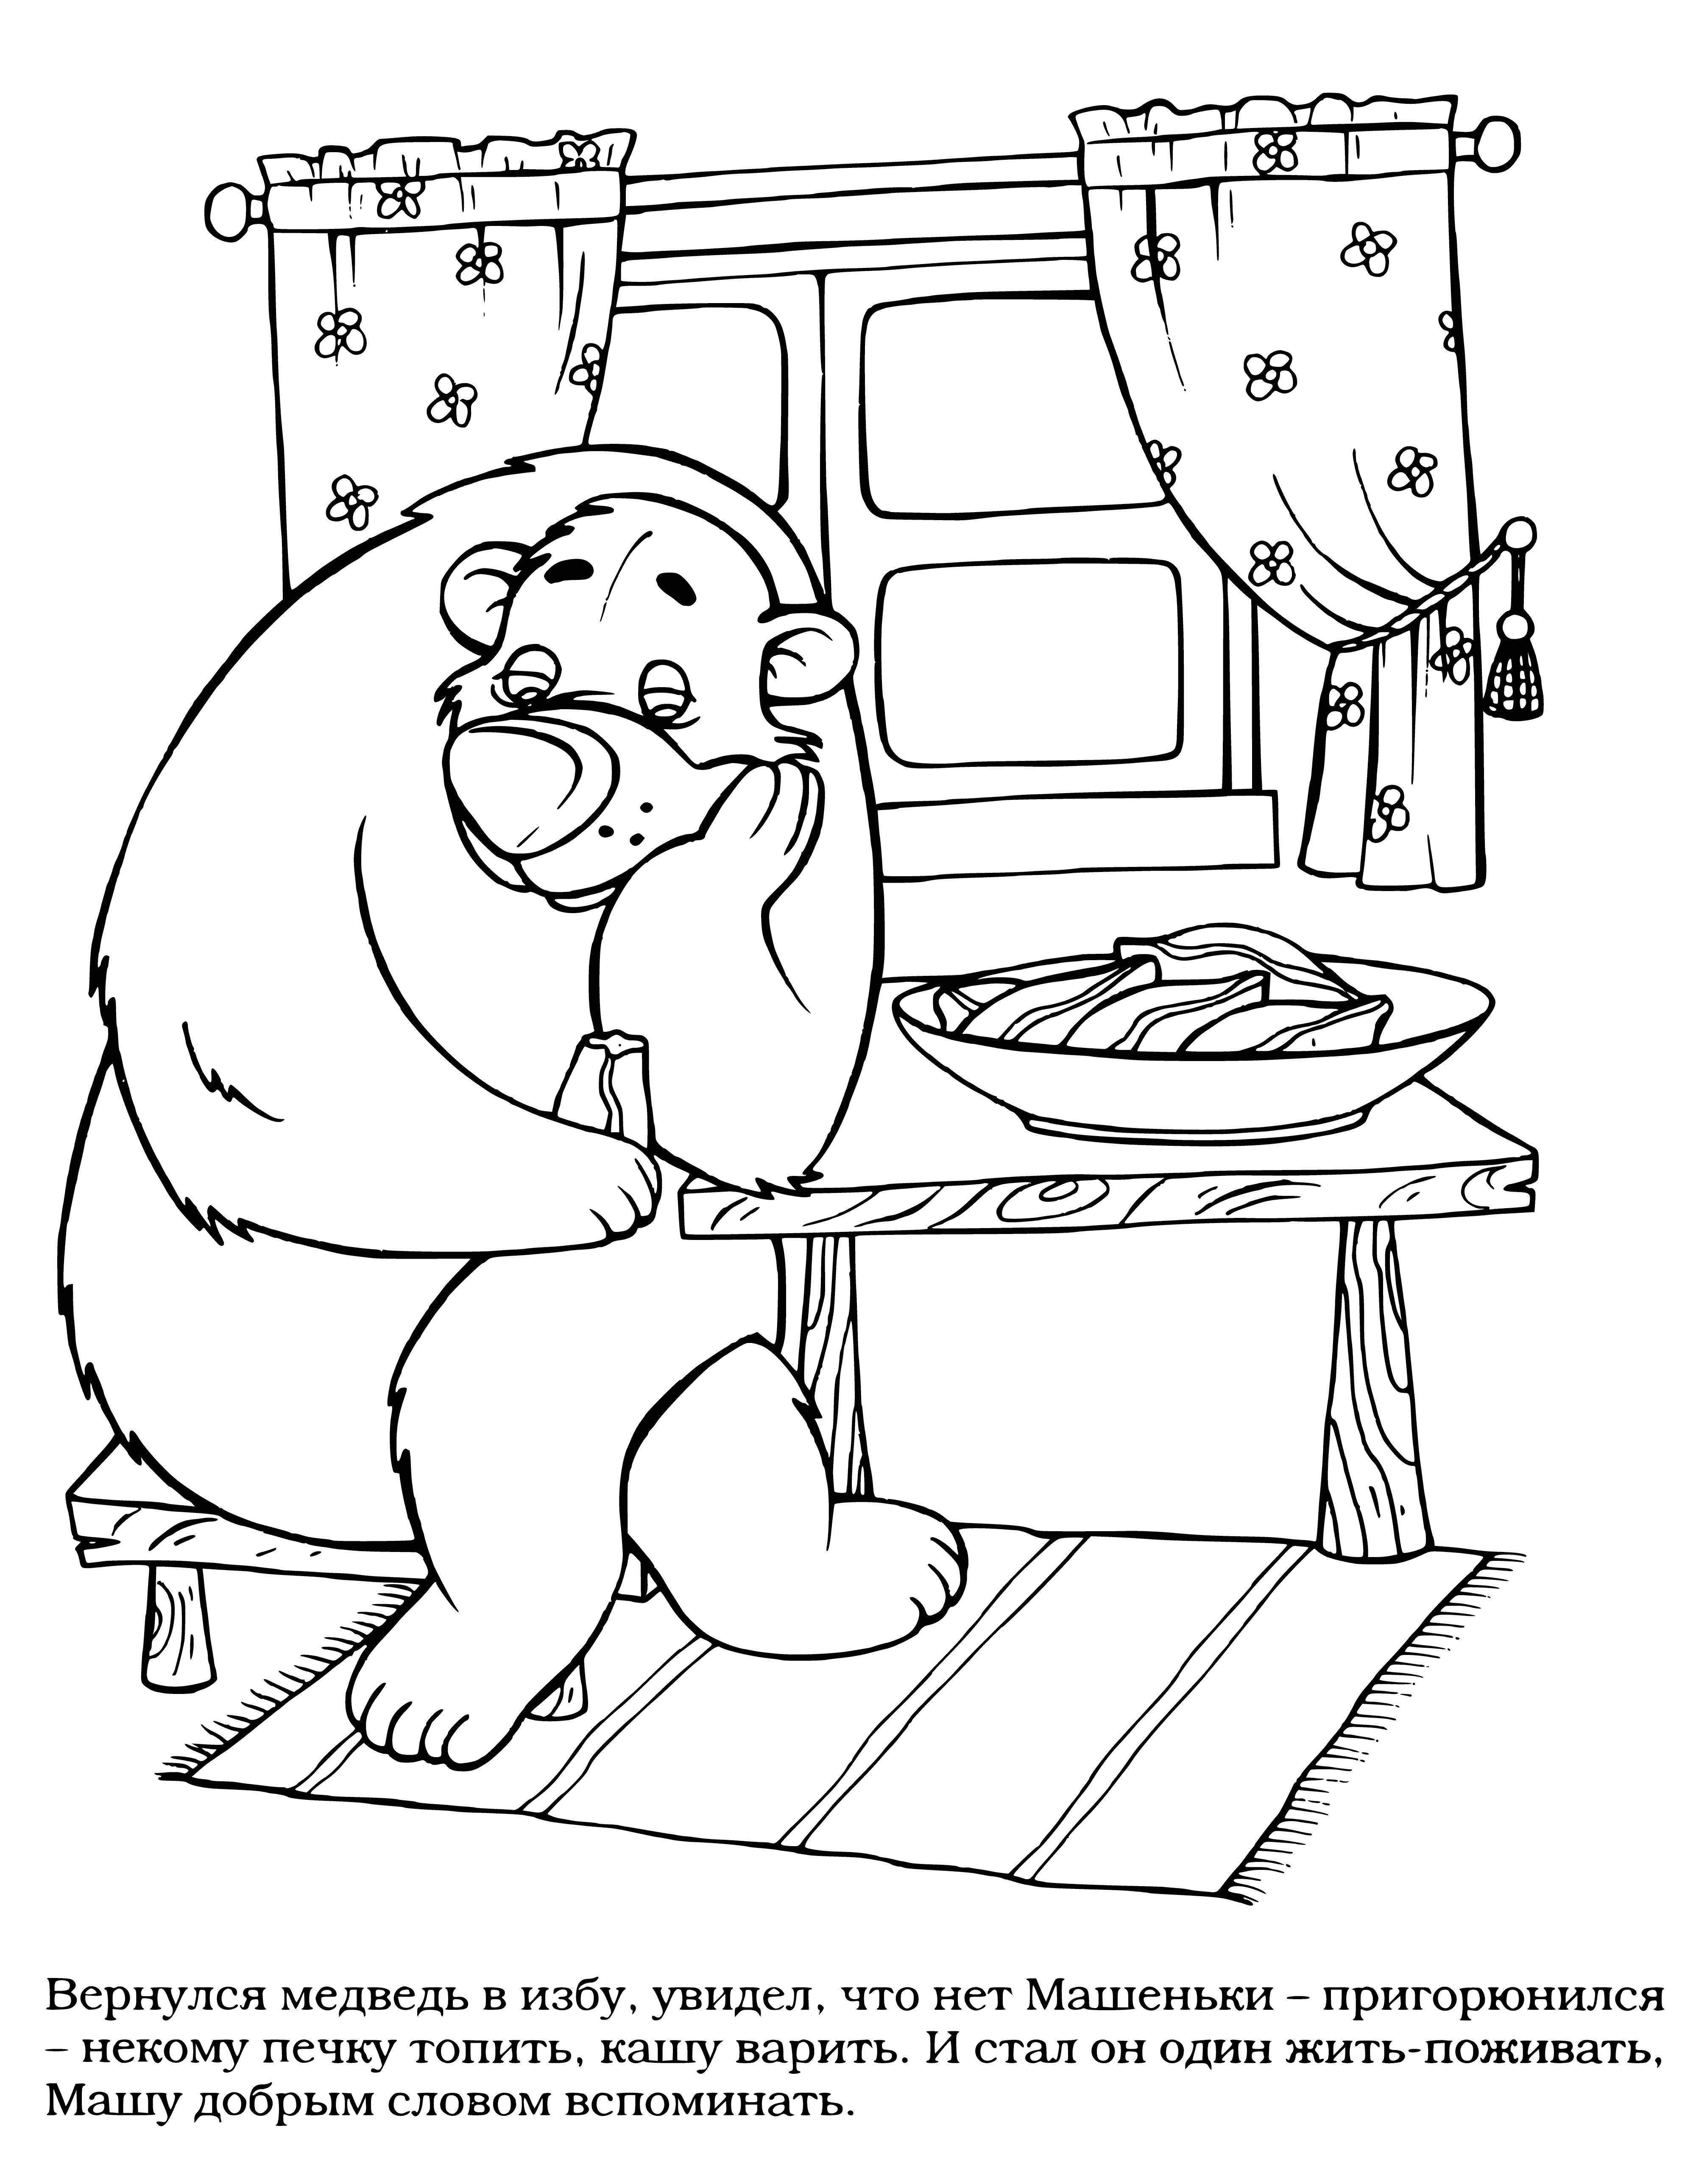 coloring page: Bear enters different huts search of food, but is turned away. He finds kind old woman in smallest hut who he helps protect.